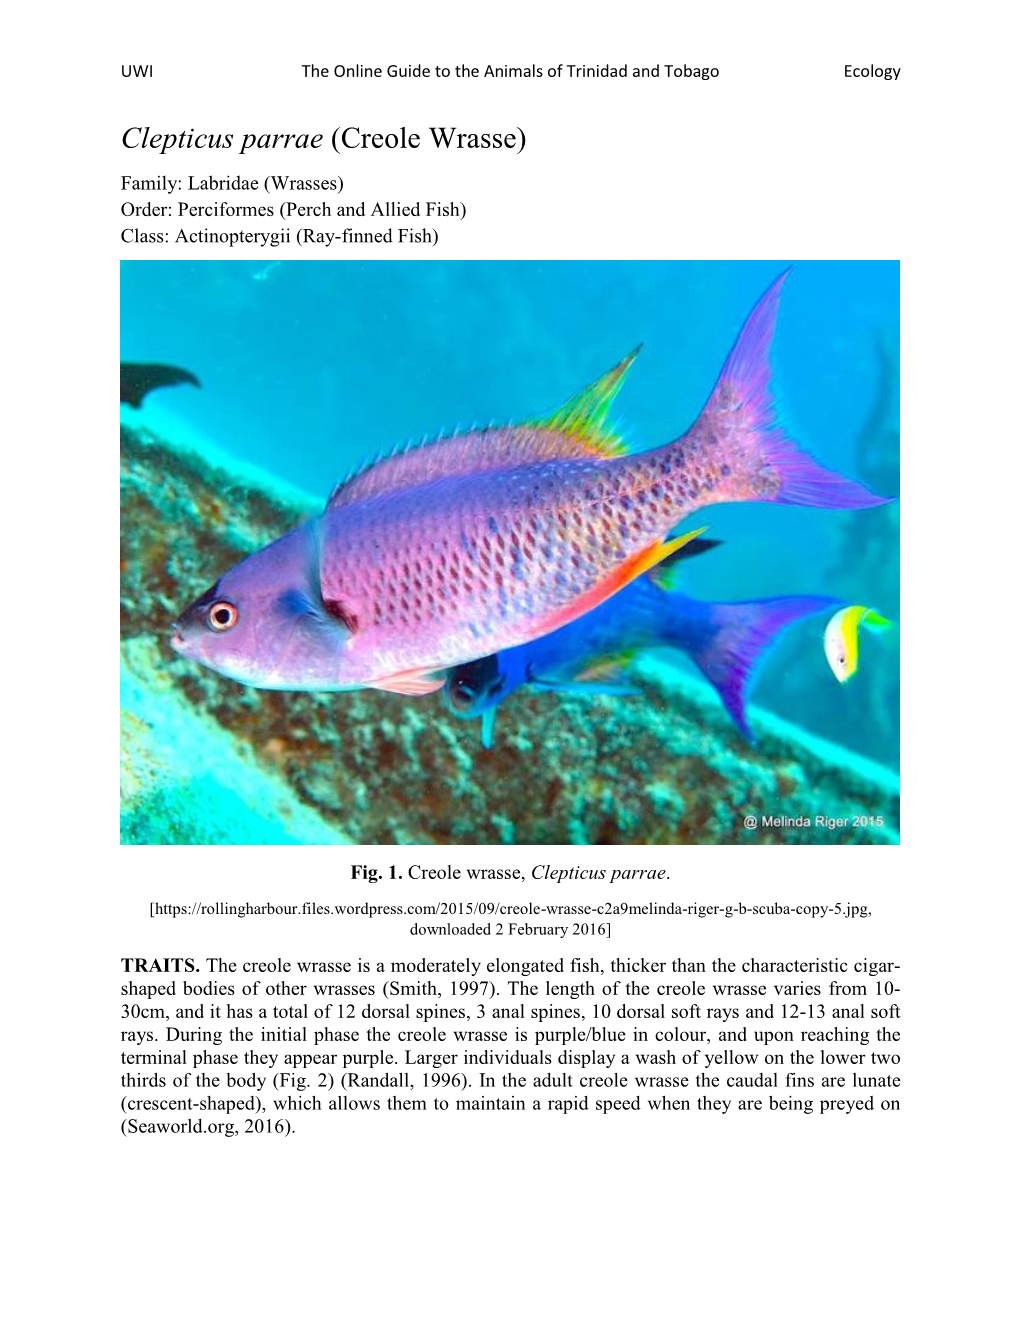 Clepticus Parrae (Creole Wrasse) Family: Labridae (Wrasses) Order: Perciformes (Perch and Allied Fish) Class: Actinopterygii (Ray-Finned Fish)